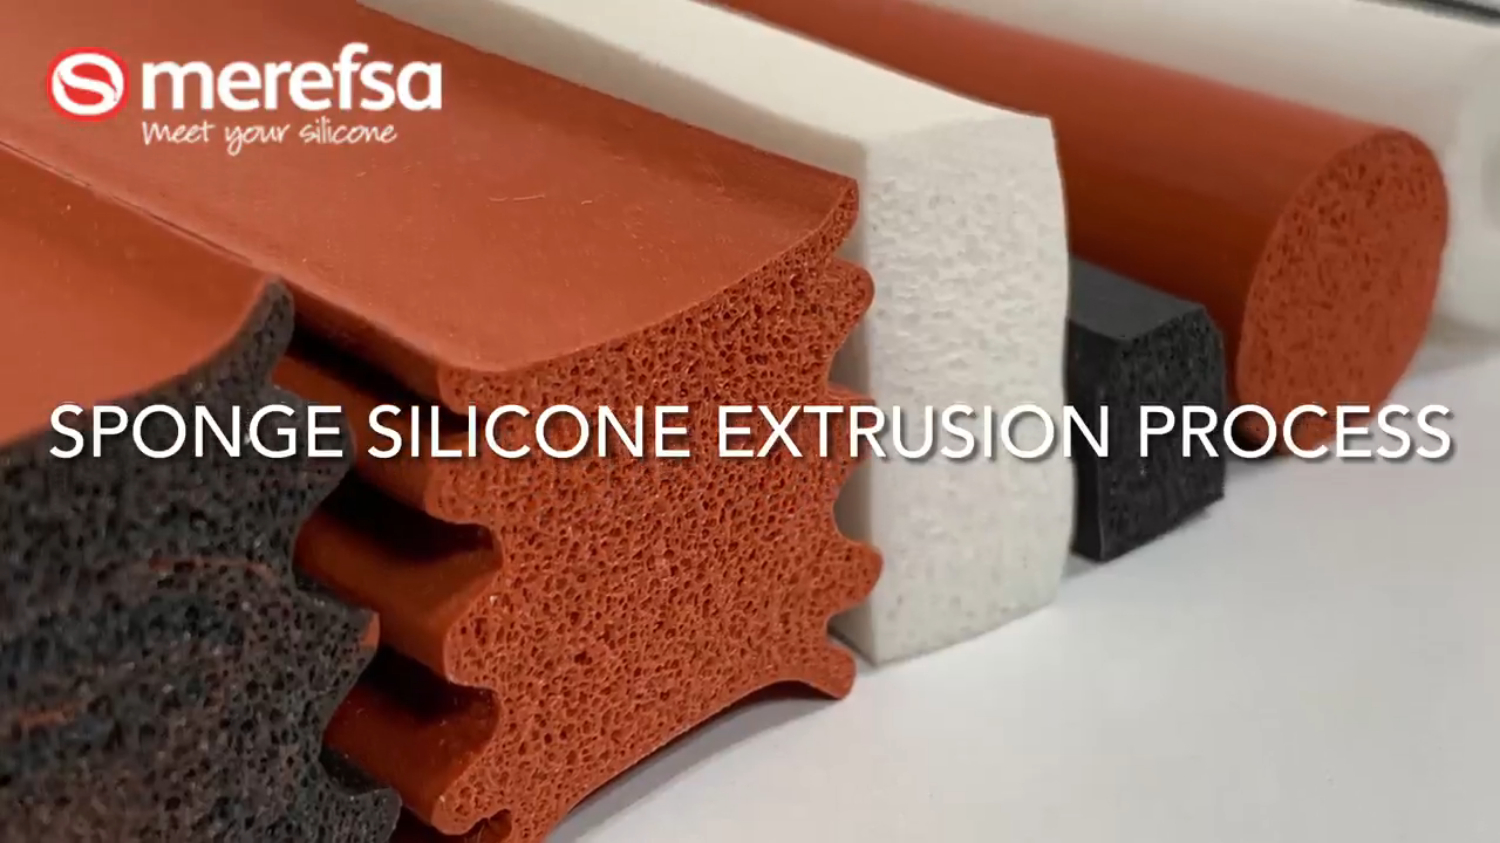 Sponge silicone extrussion process